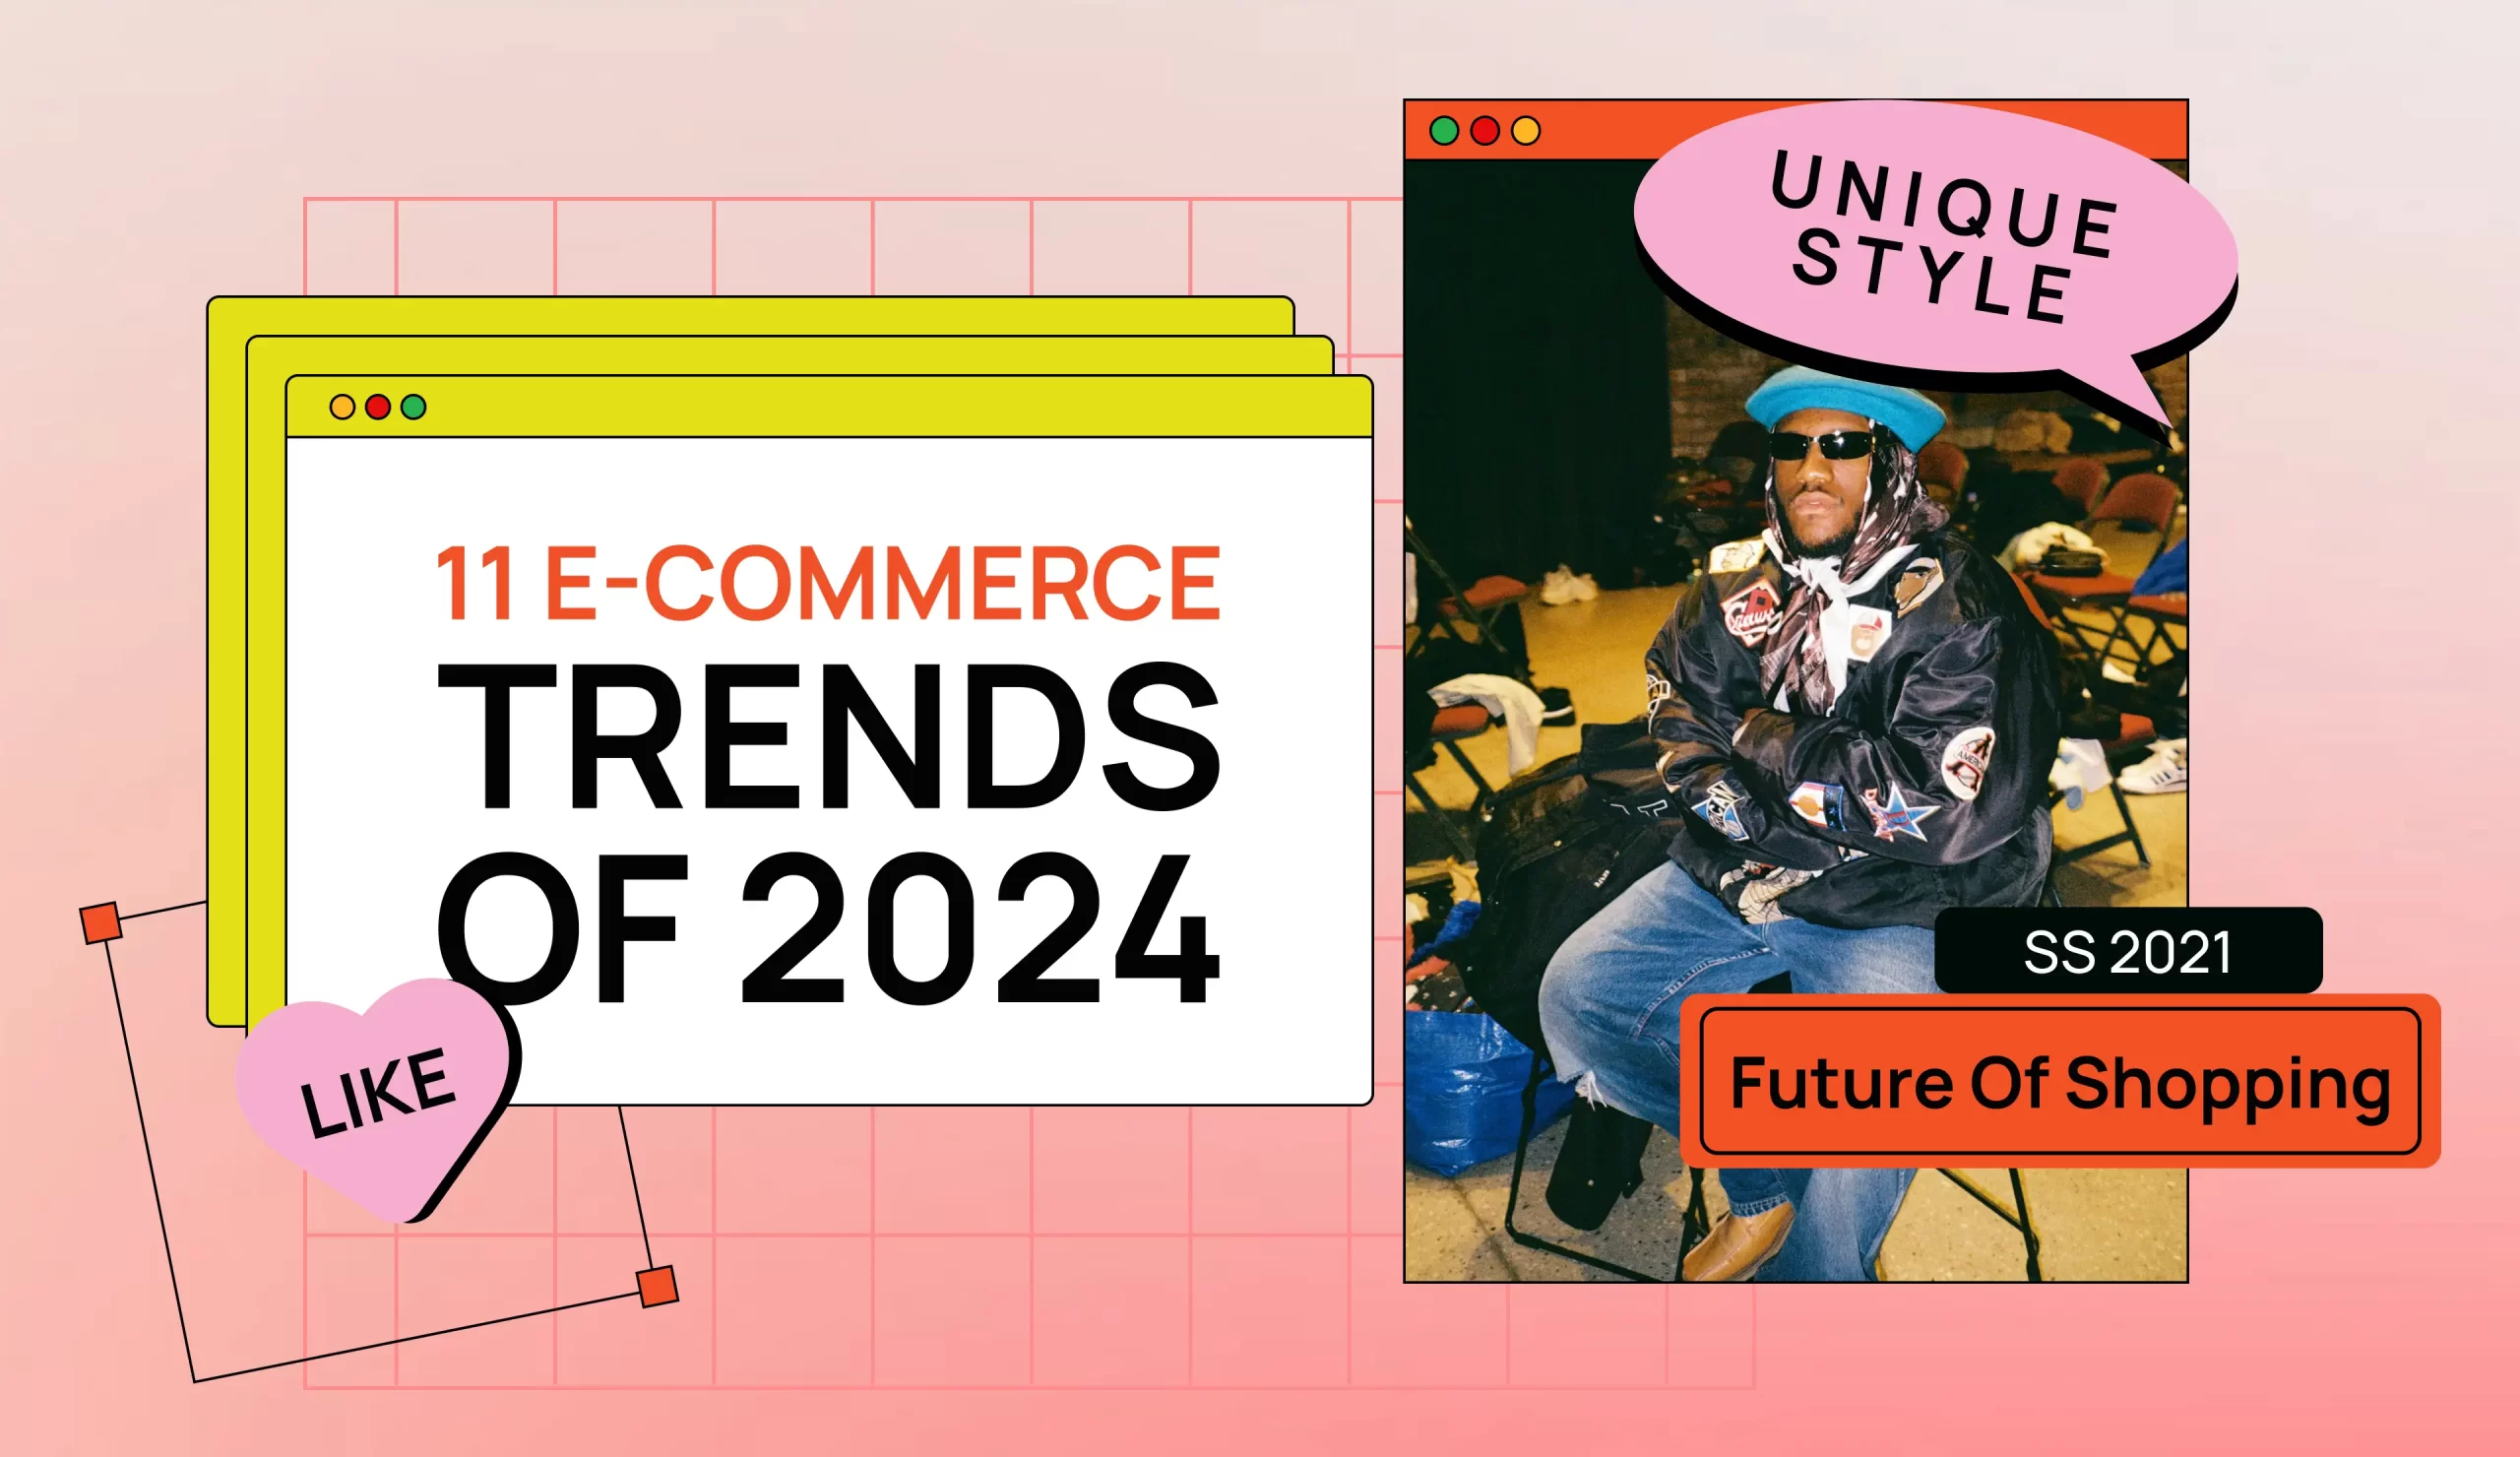 11 E-commerce Trends of 2024 – Future of Shopping